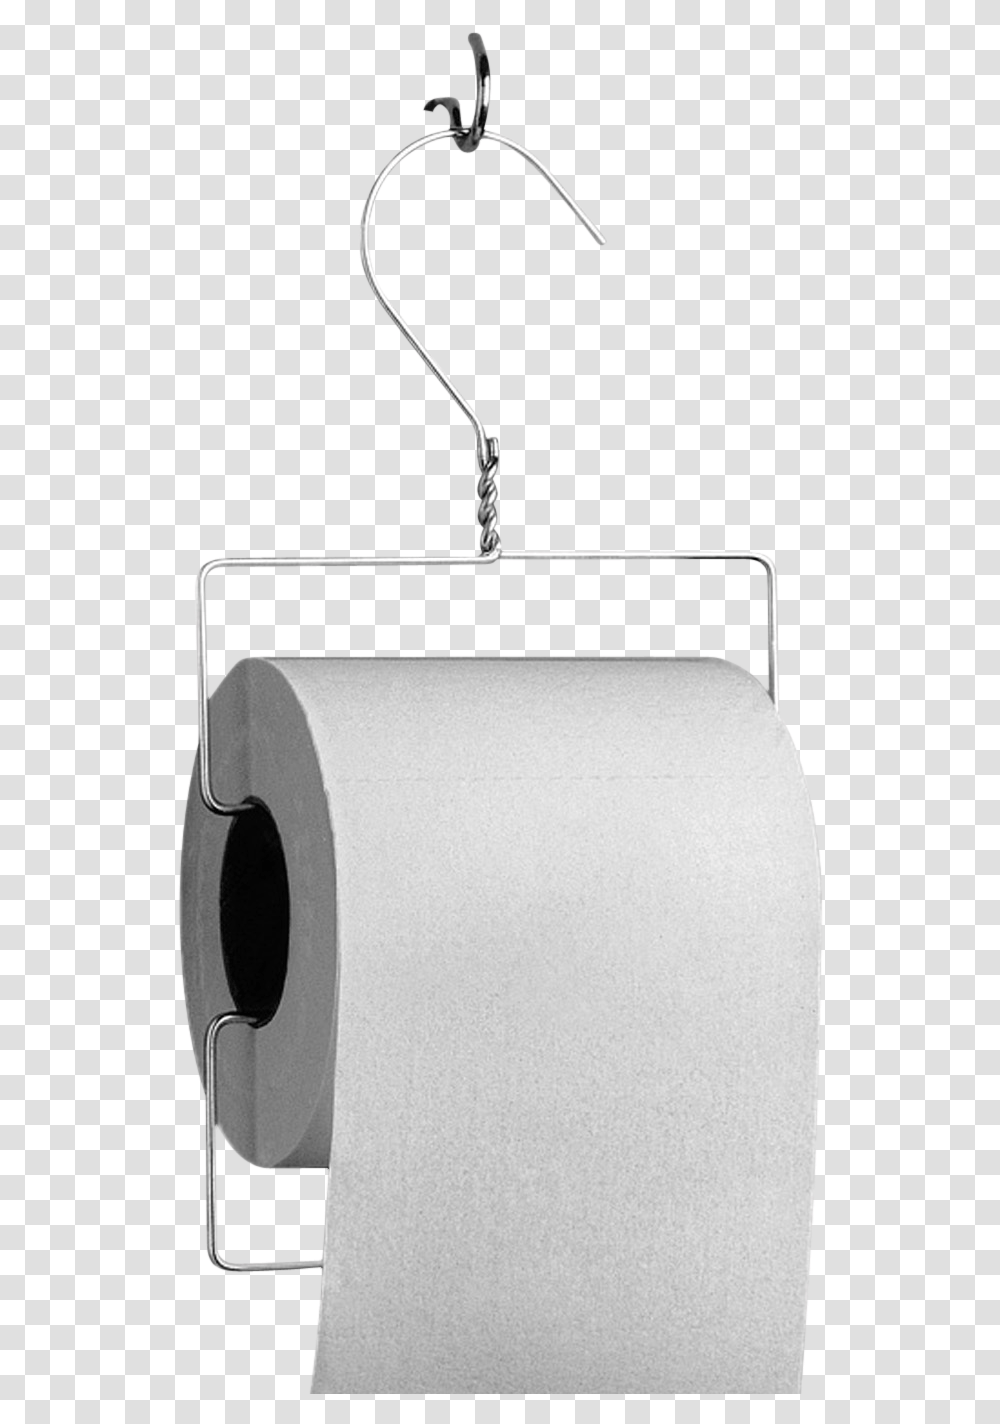 Clojo Toilet Paper Holder By Henk Stalling For Goods 0 Tissue Paper, Towel, Paper Towel Transparent Png